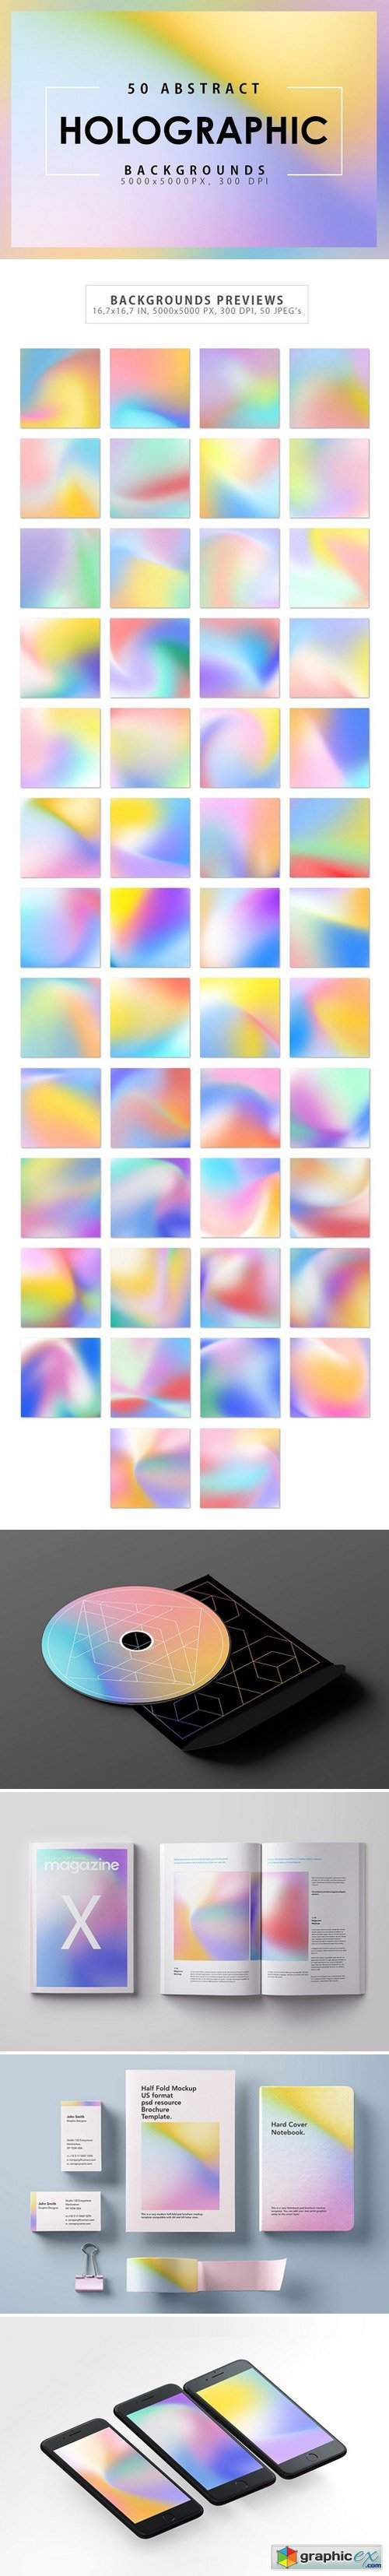 50 Holographic Backgrounds 2227793